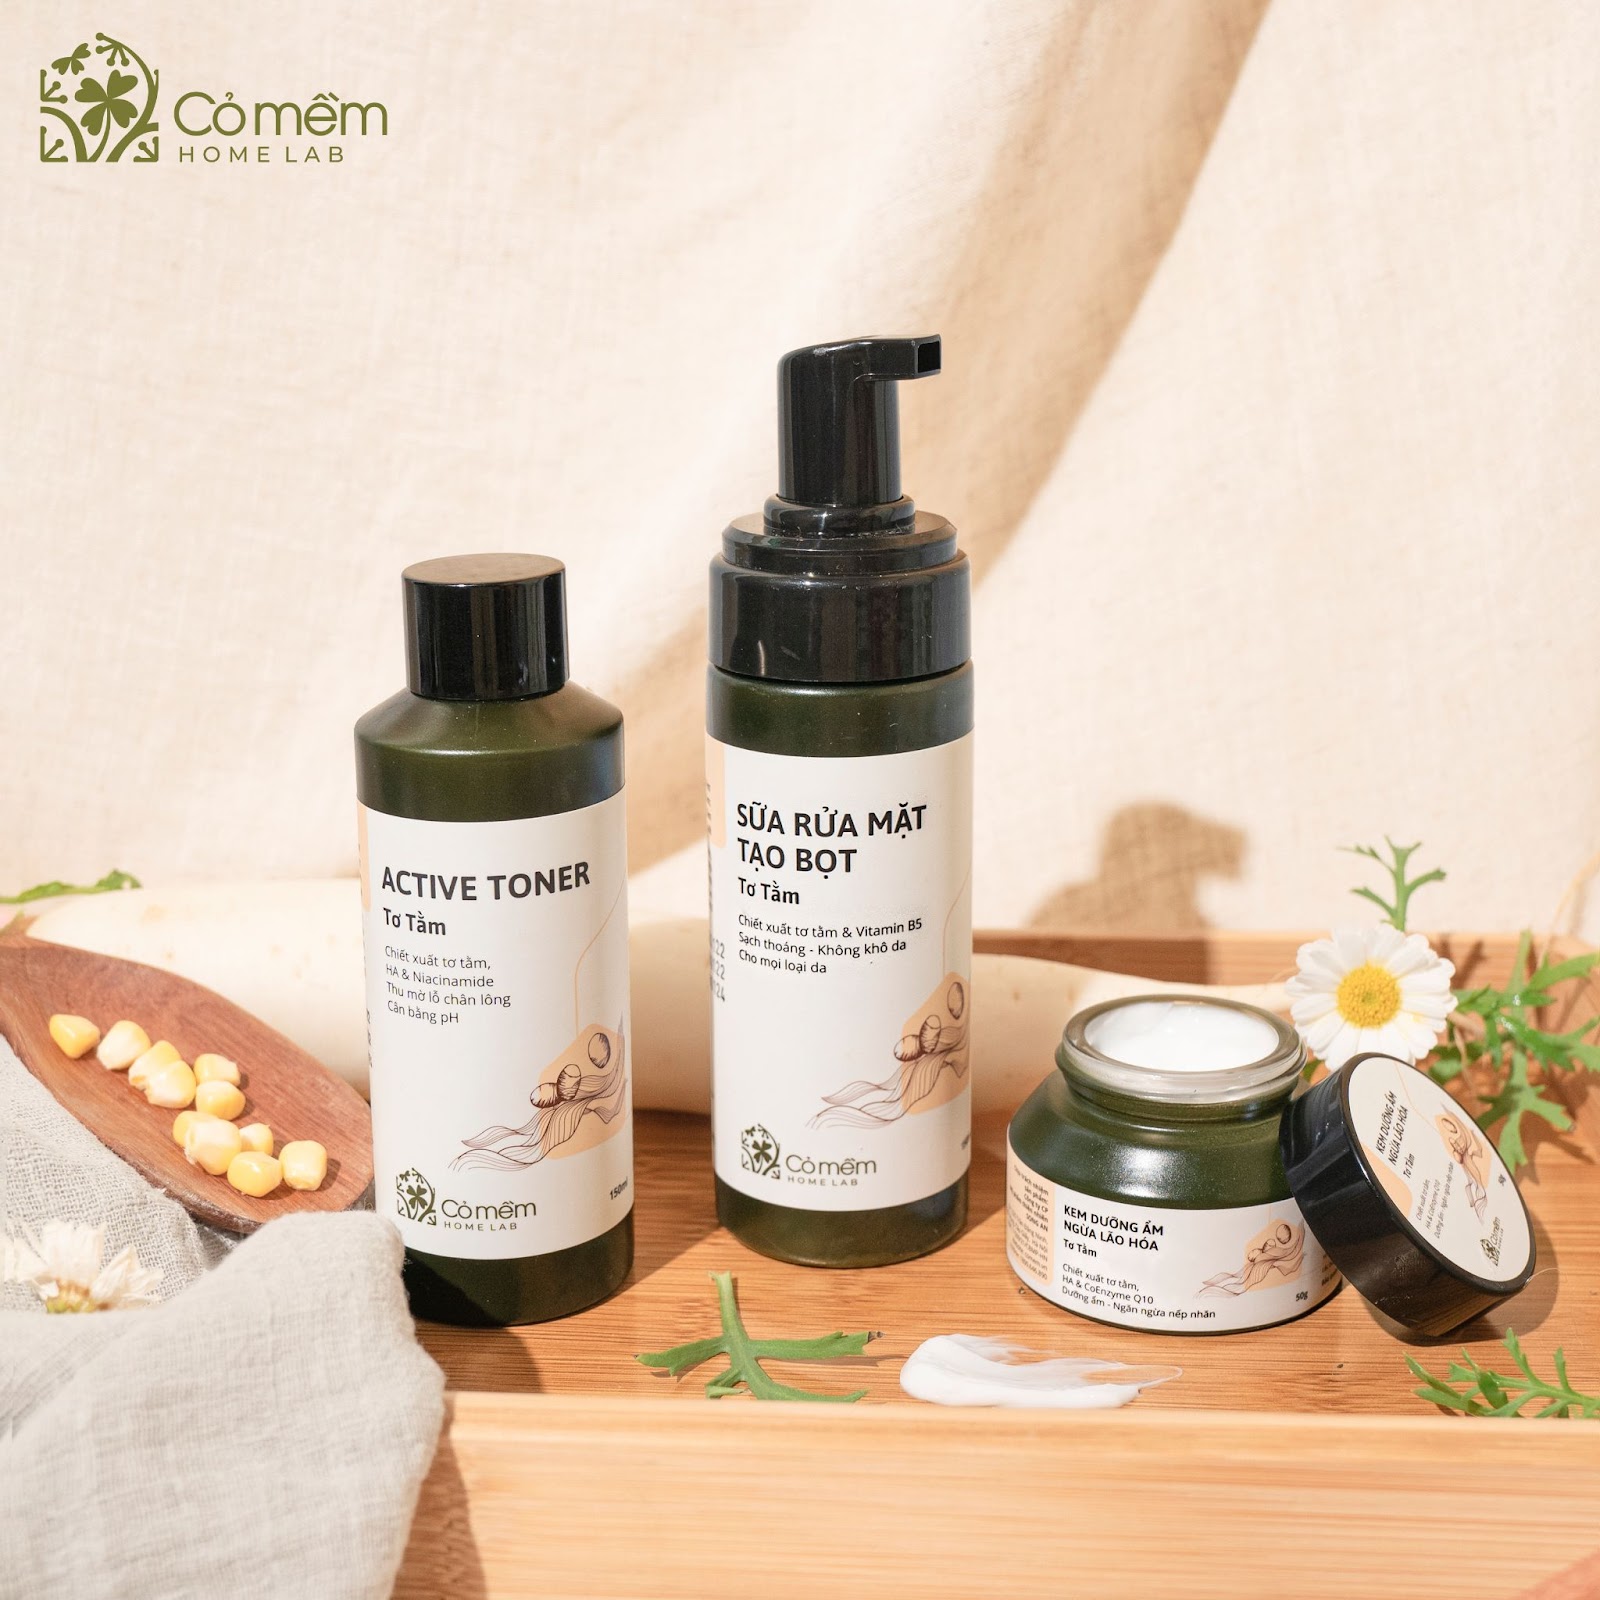 Review of Silk Skin Care Set from Soft Grass: Minimalist - Gentle - For delicate skin - 5